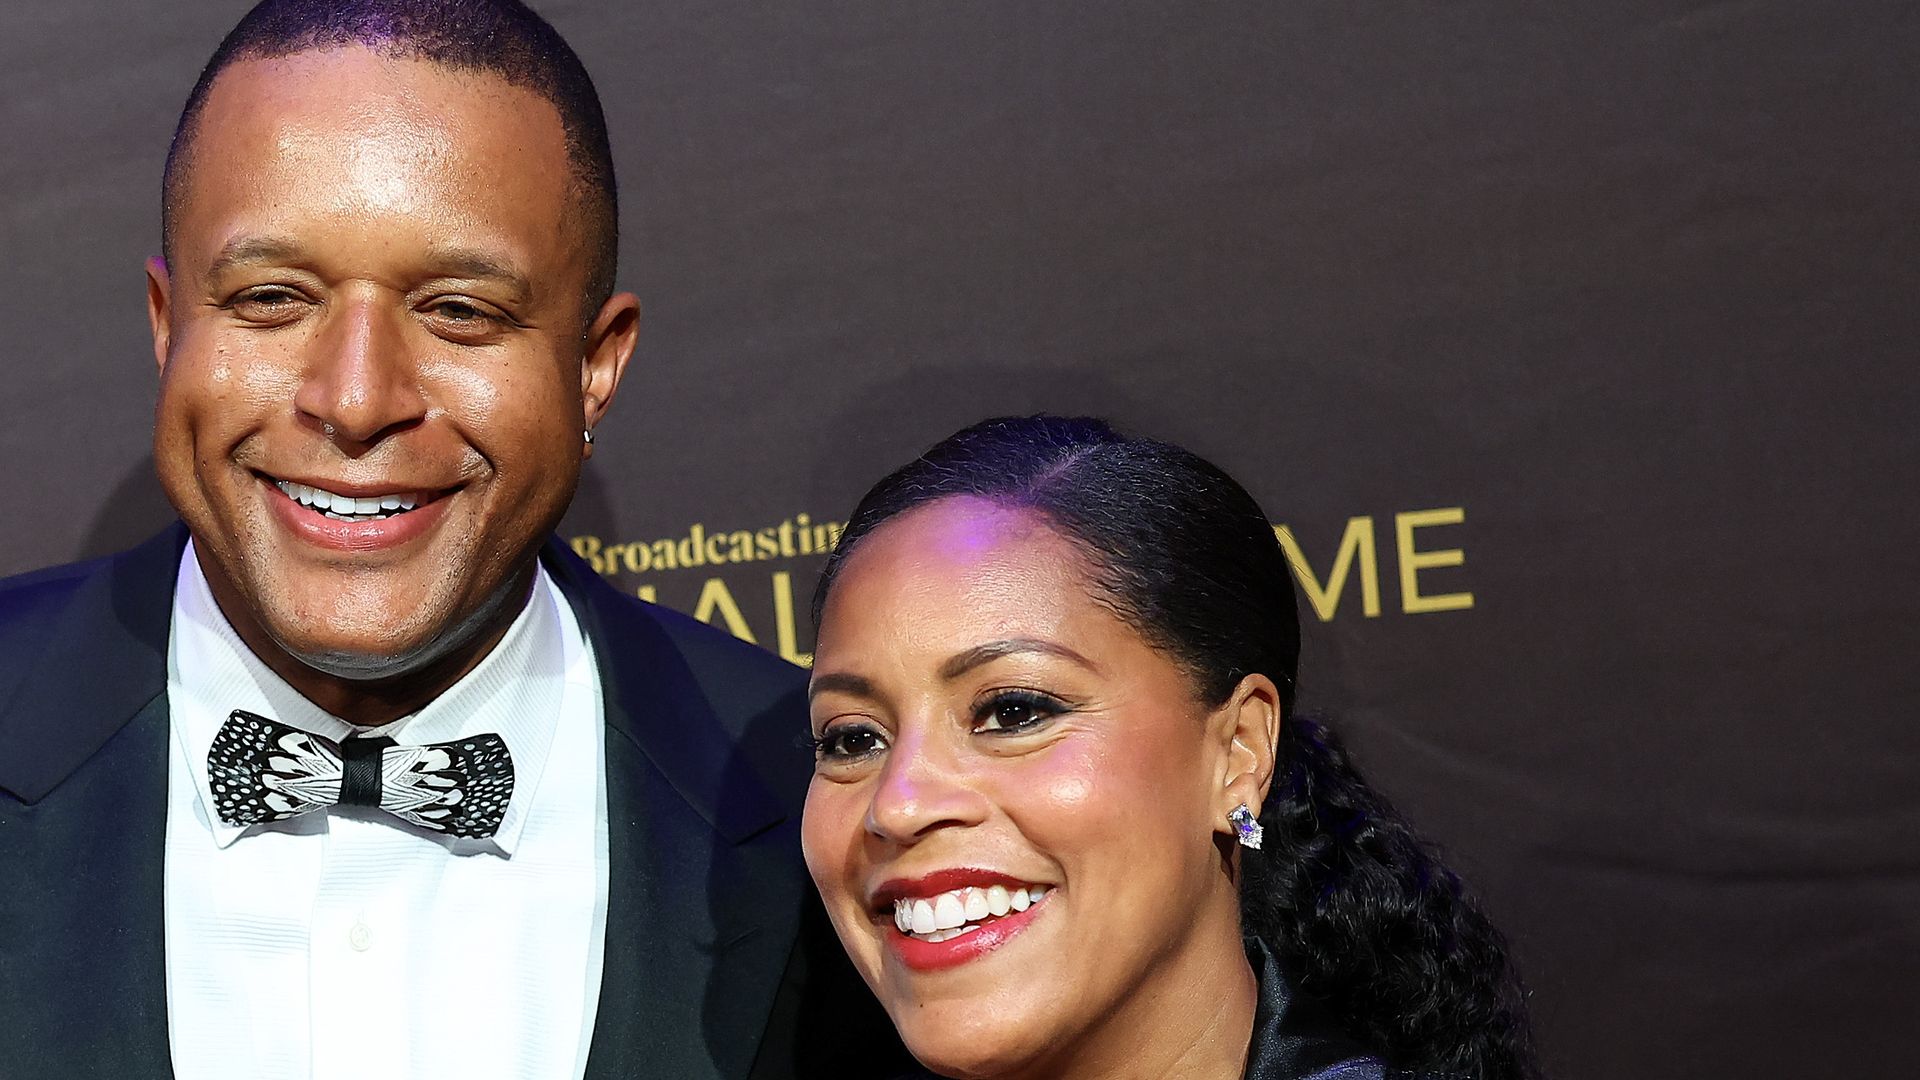 NEW YORK, NEW YORK - MAY 03: (L-R) Craig Melvin and Sheinelle Jones attend the 2023 Broadcasting + Cable Hall Of Fame Gala at The Ziegfeld Ballroom on May 03, 2023 in New York City. (Photo by Arturo Holmes/Getty Images)